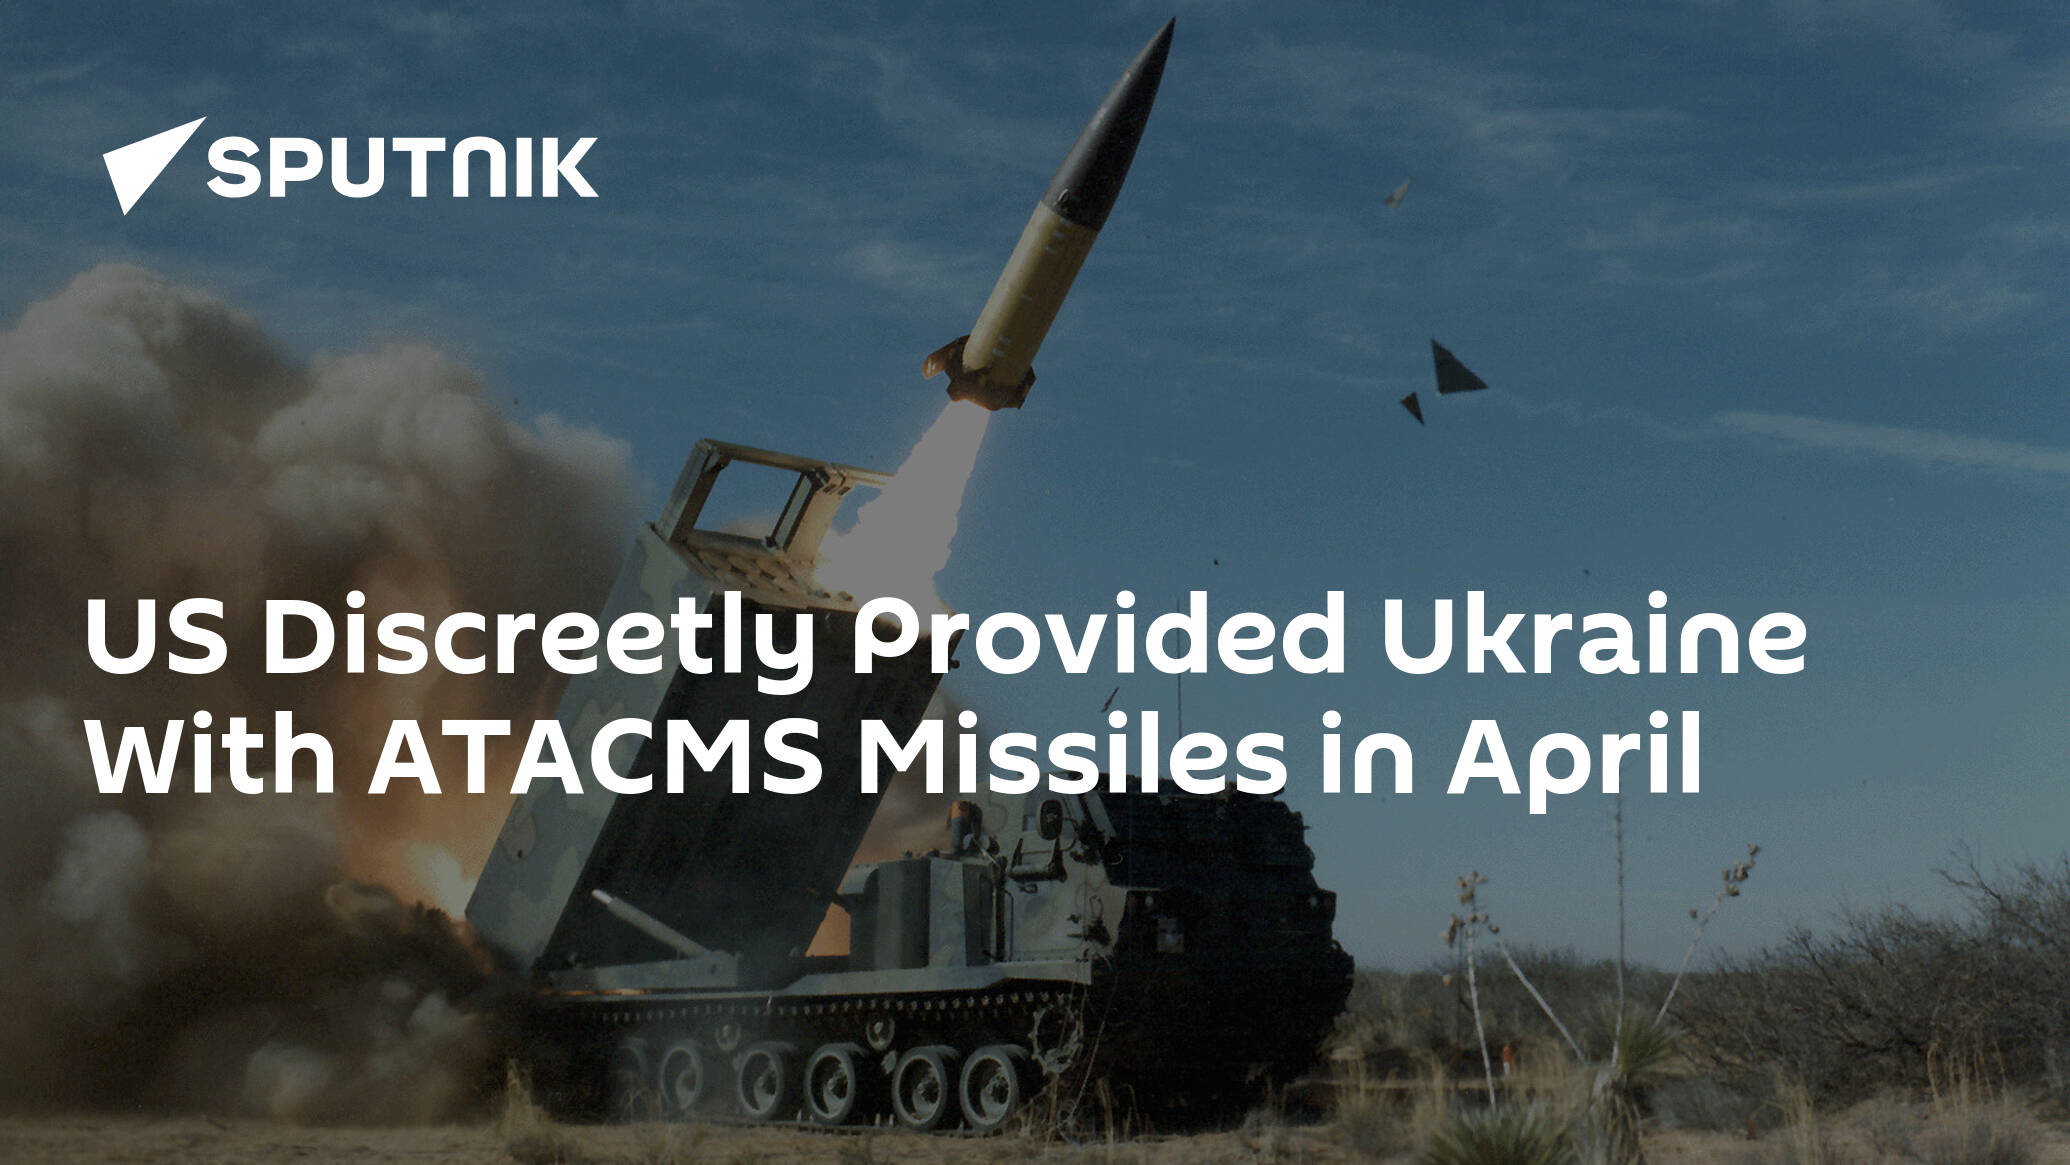 US Discreetly Provided Ukraine With ATACMS Missiles in April